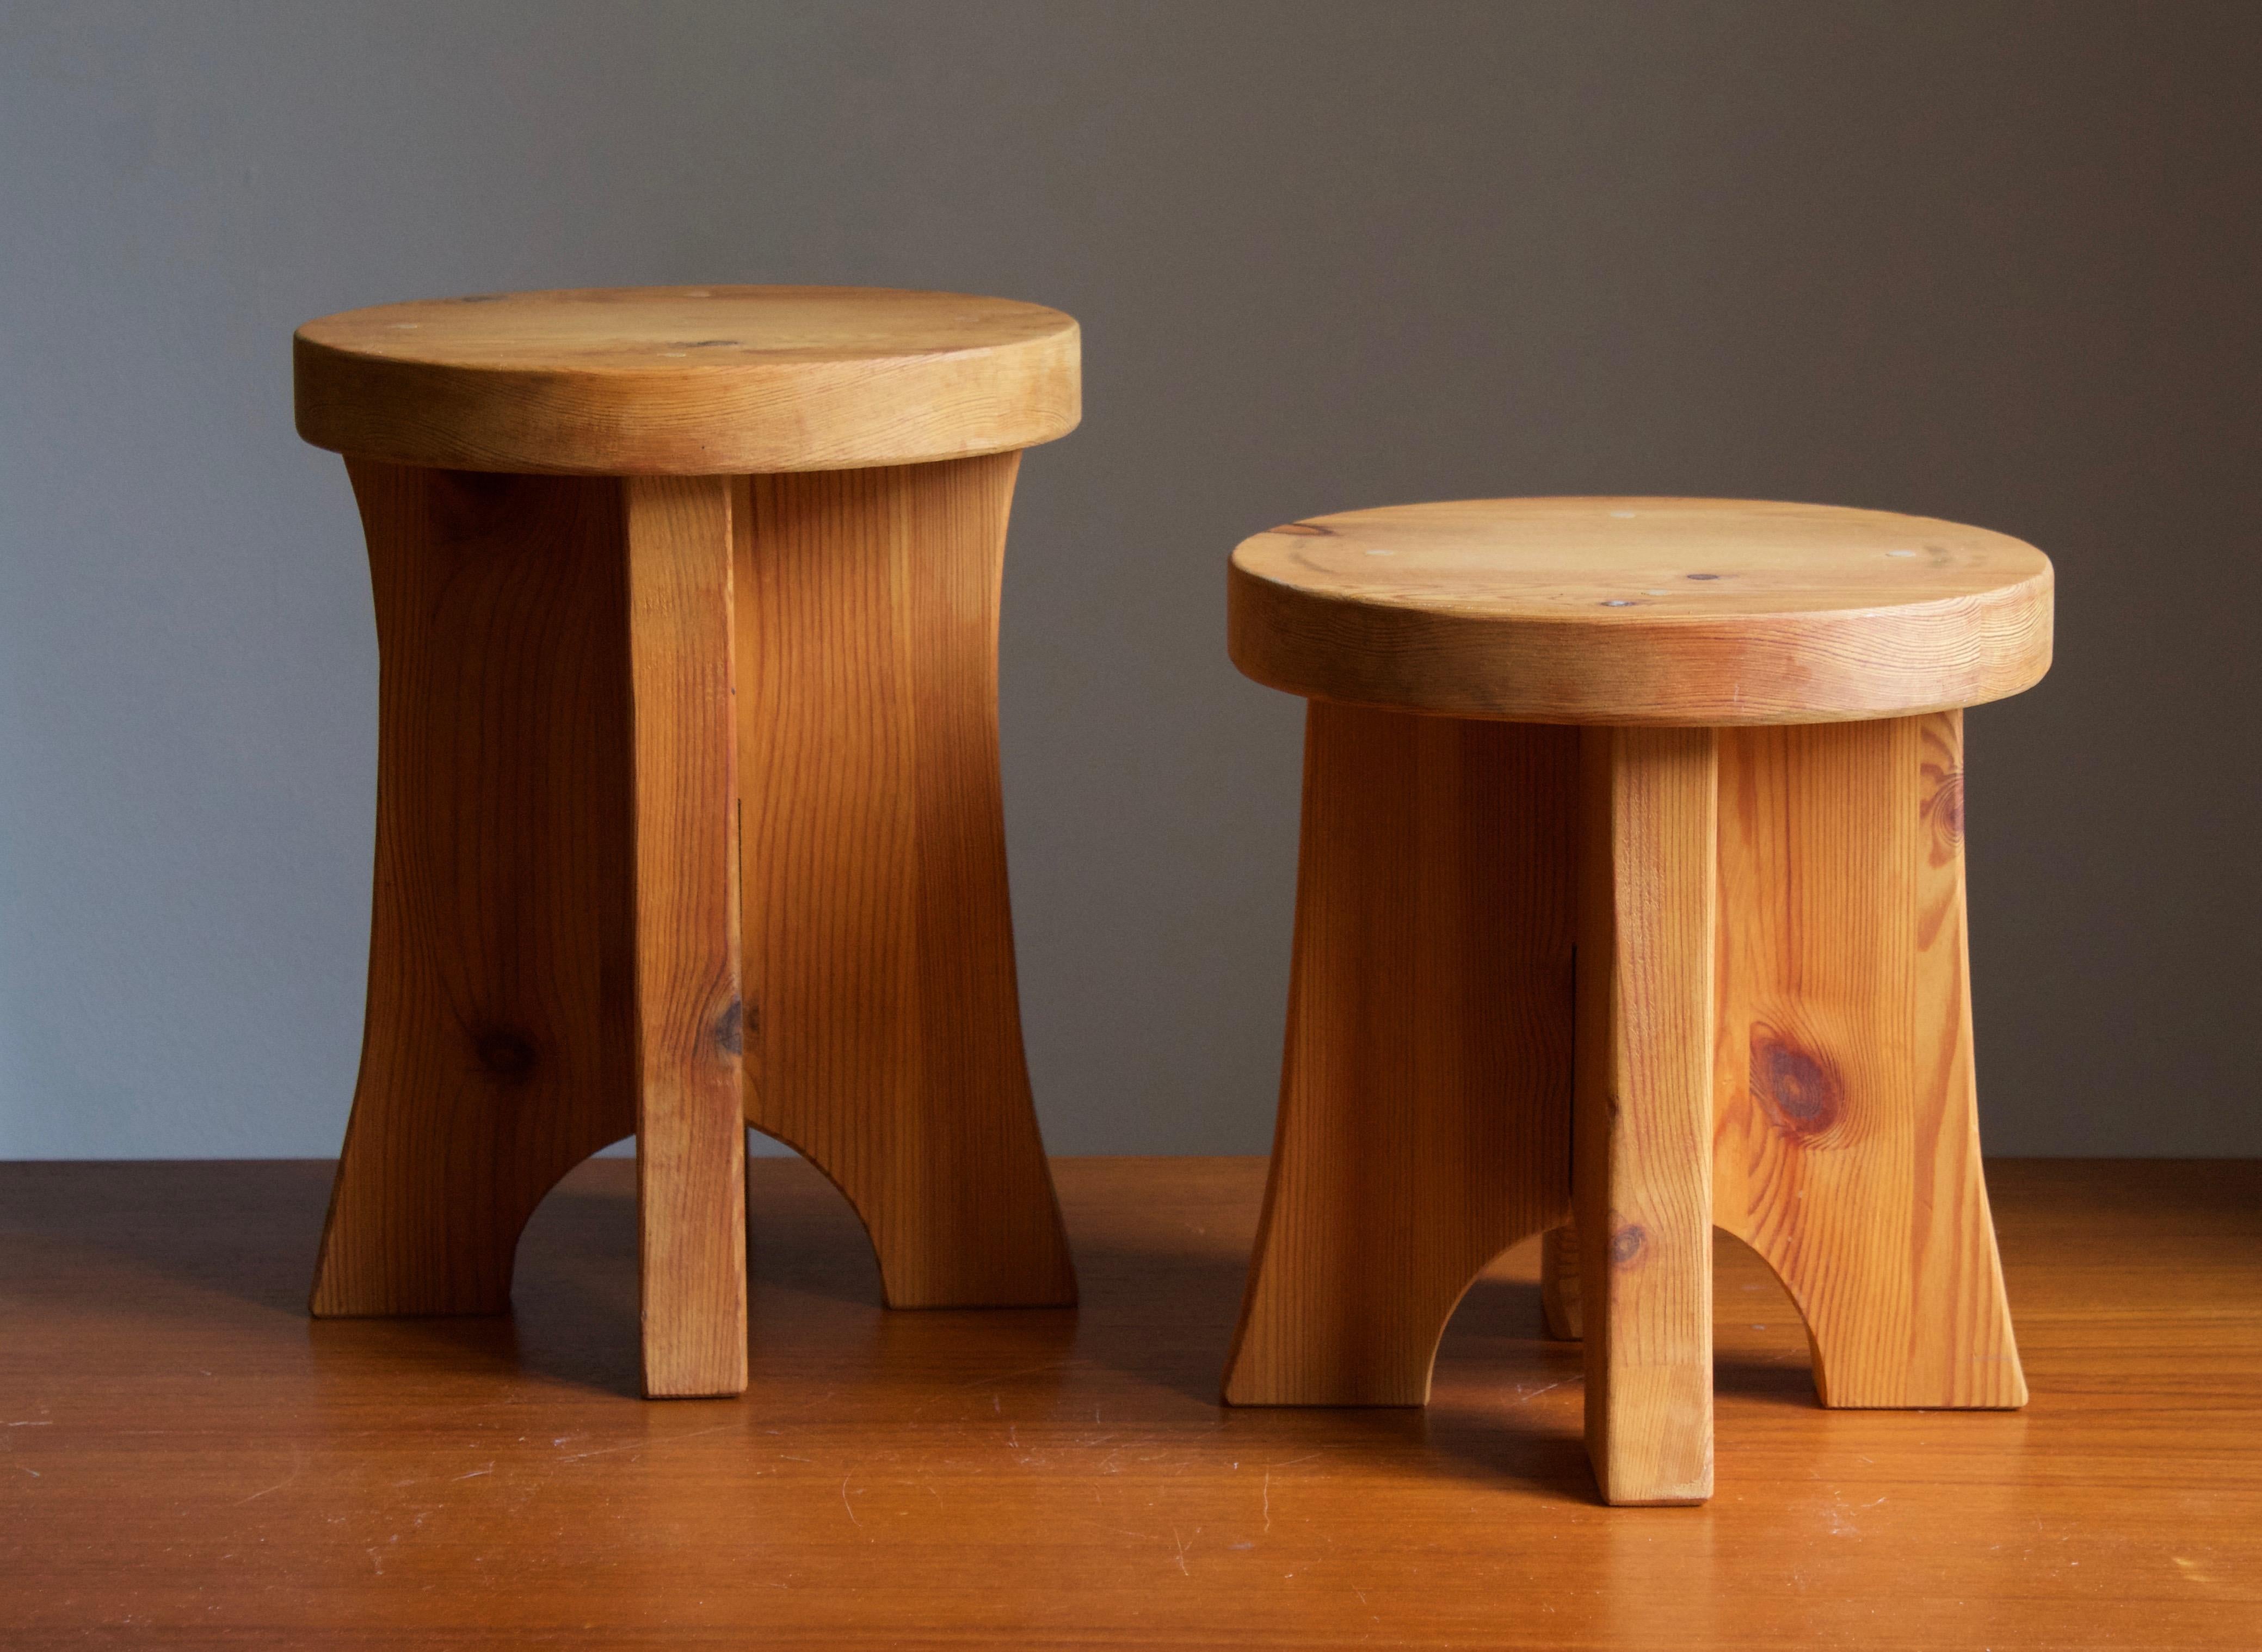 Two Swedish pinewood stools. By unknown designer, c. 1970s. Features simple form and pure expression.





